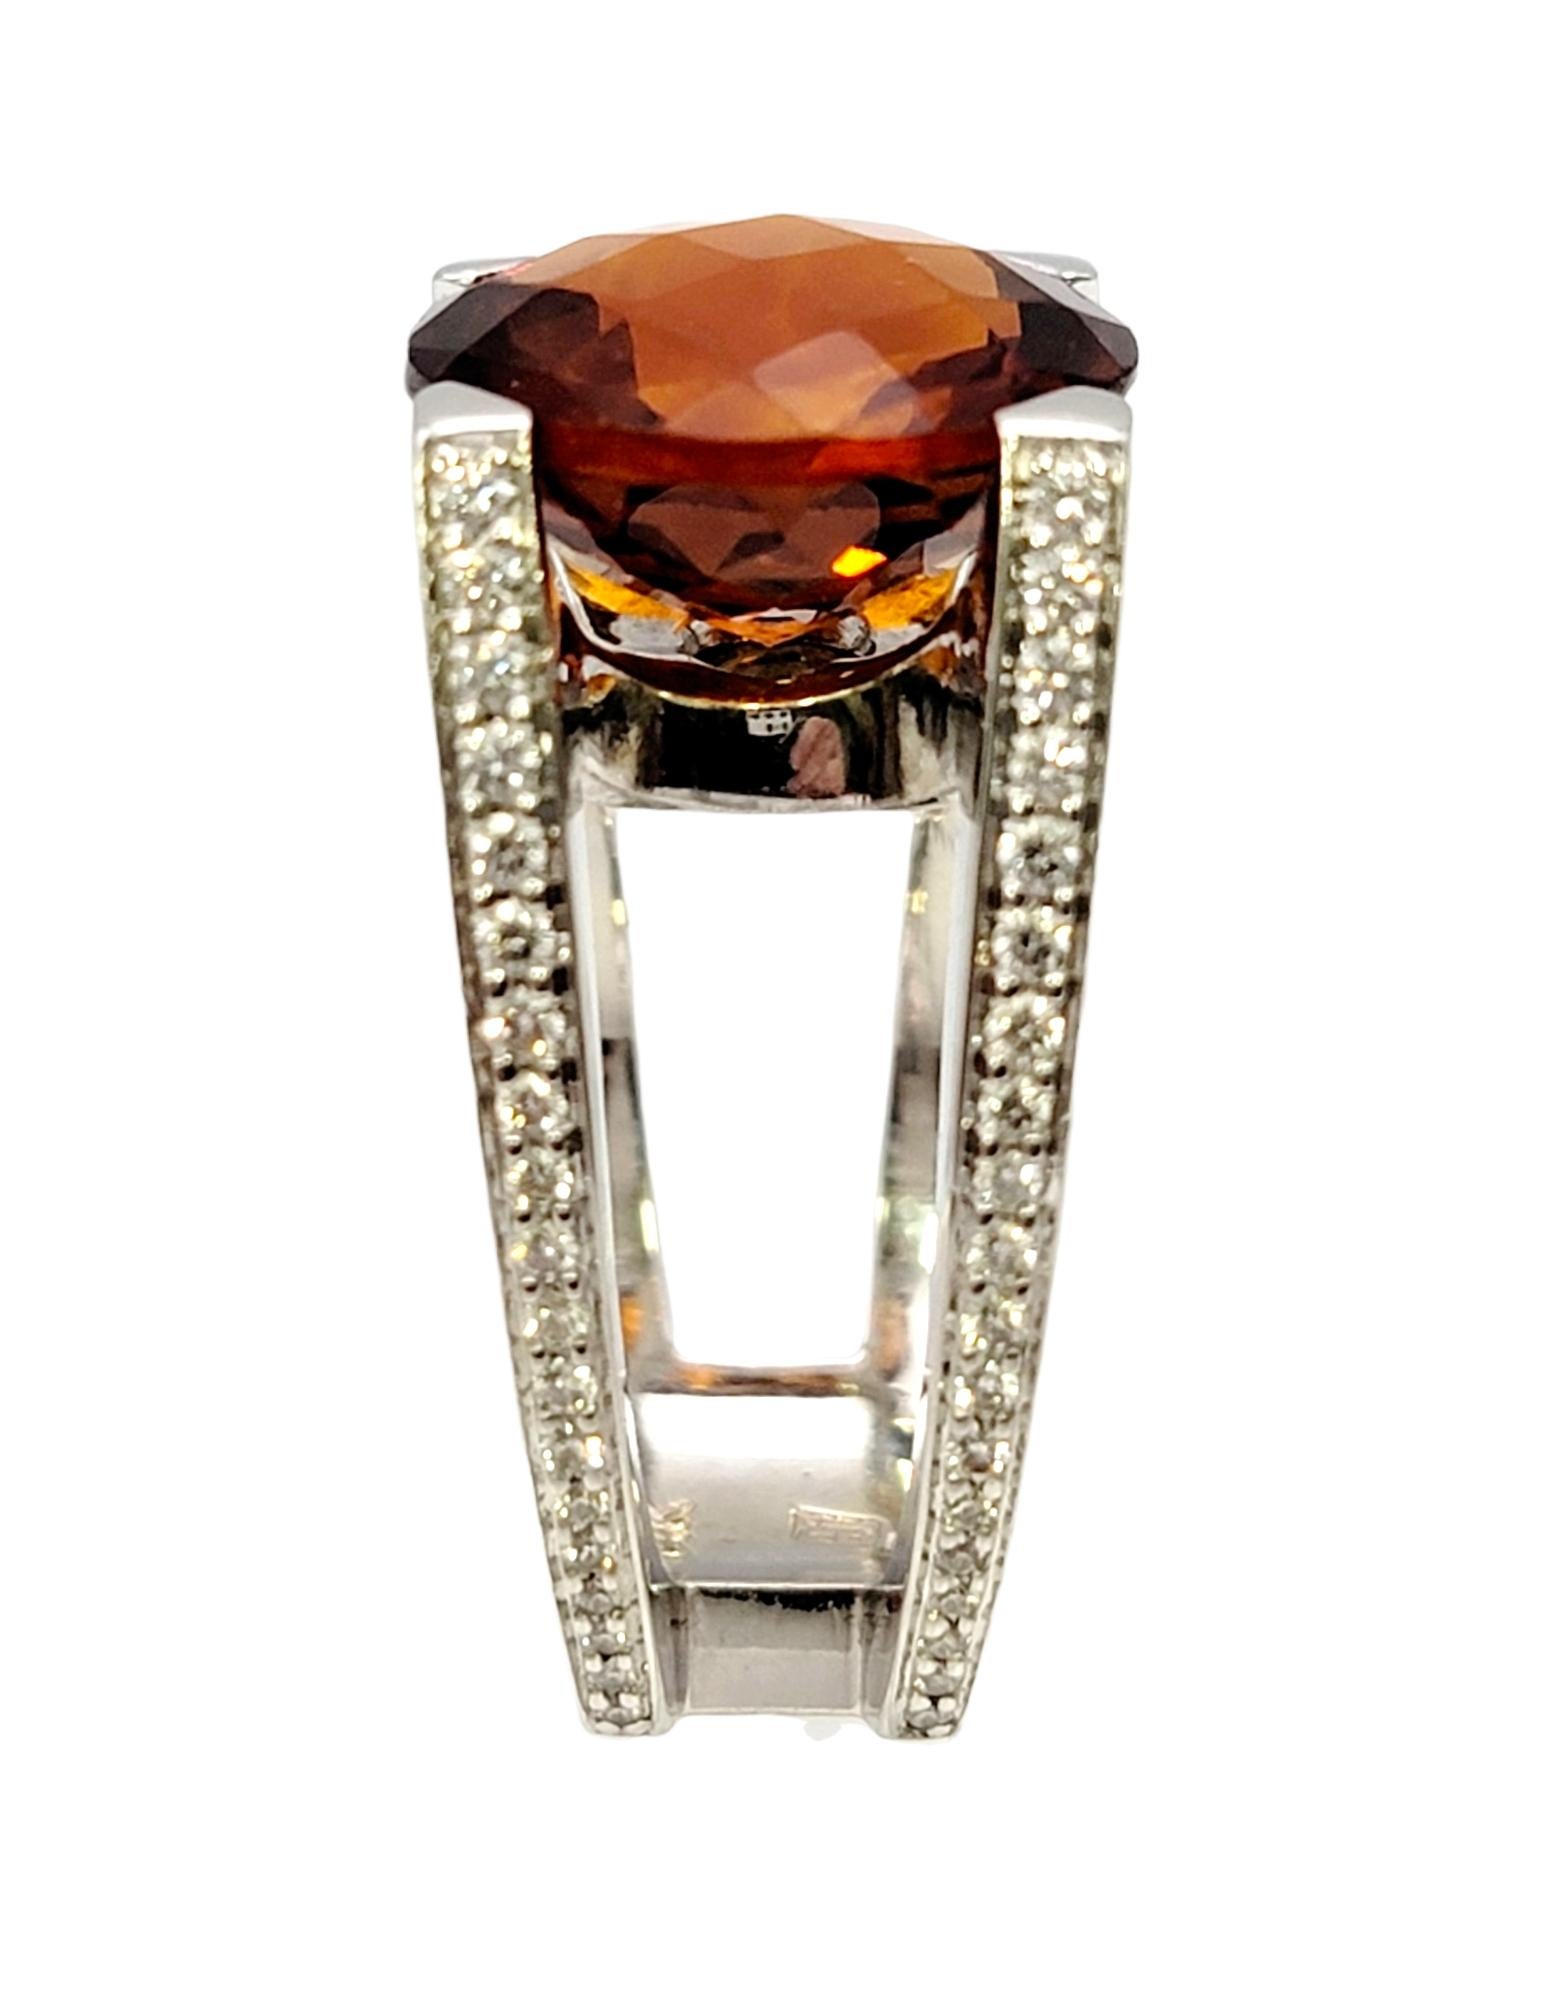 Scott Gauthier Contemporary Citrine and Pave Diamond Squared Split Shank Ring In Good Condition For Sale In Scottsdale, AZ